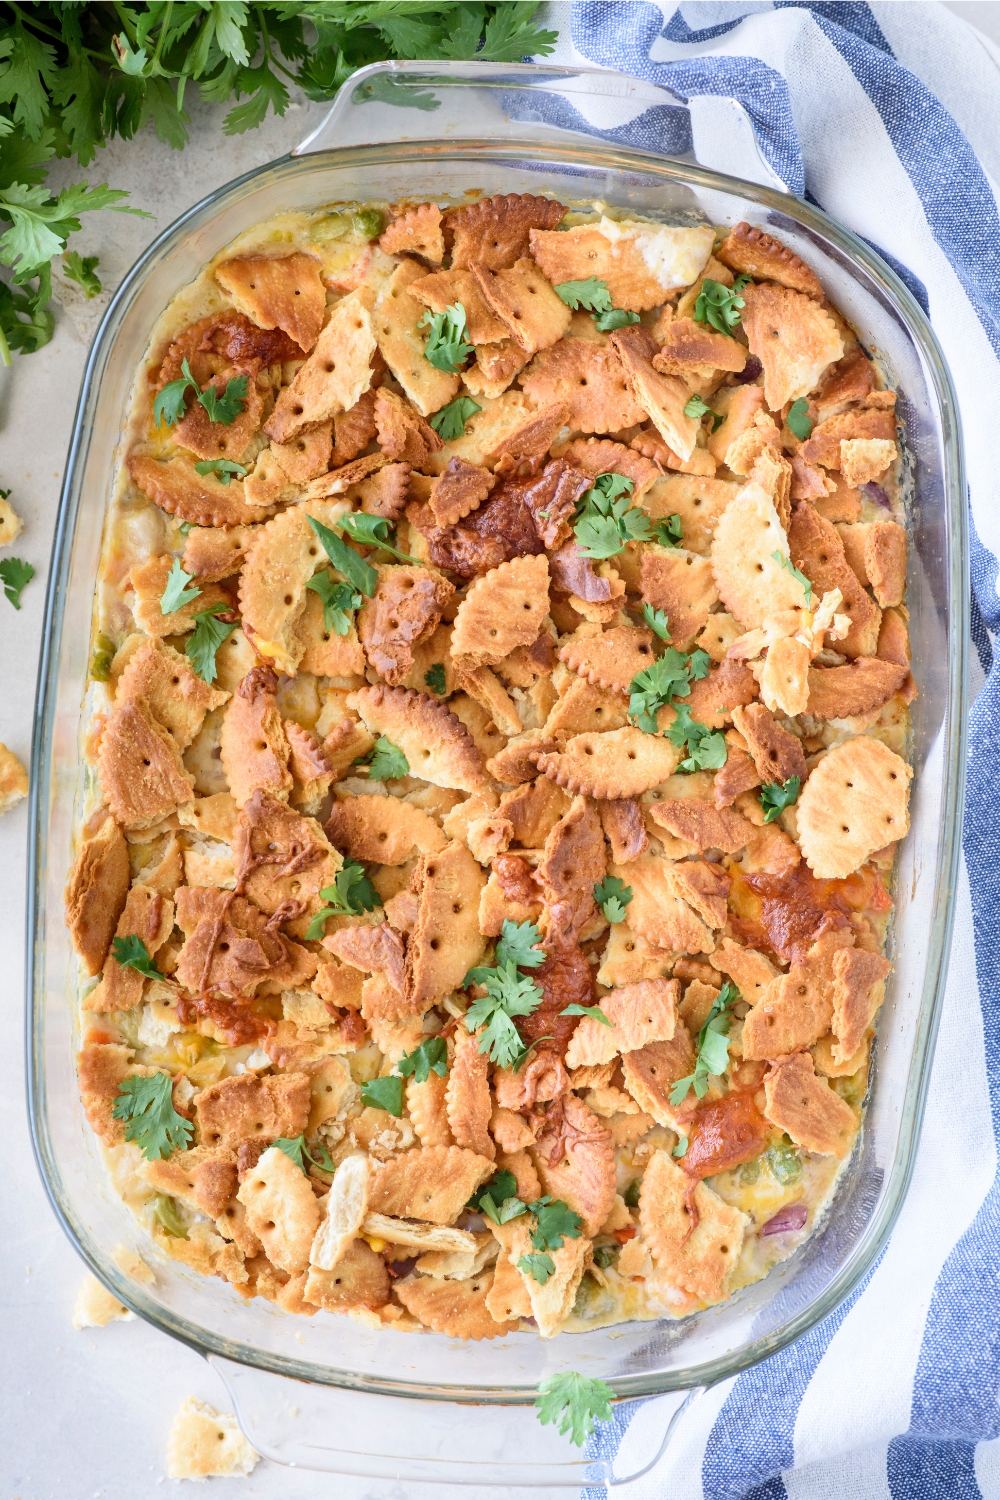 A casserole dish with baked casserole topped with chopped cilantro.